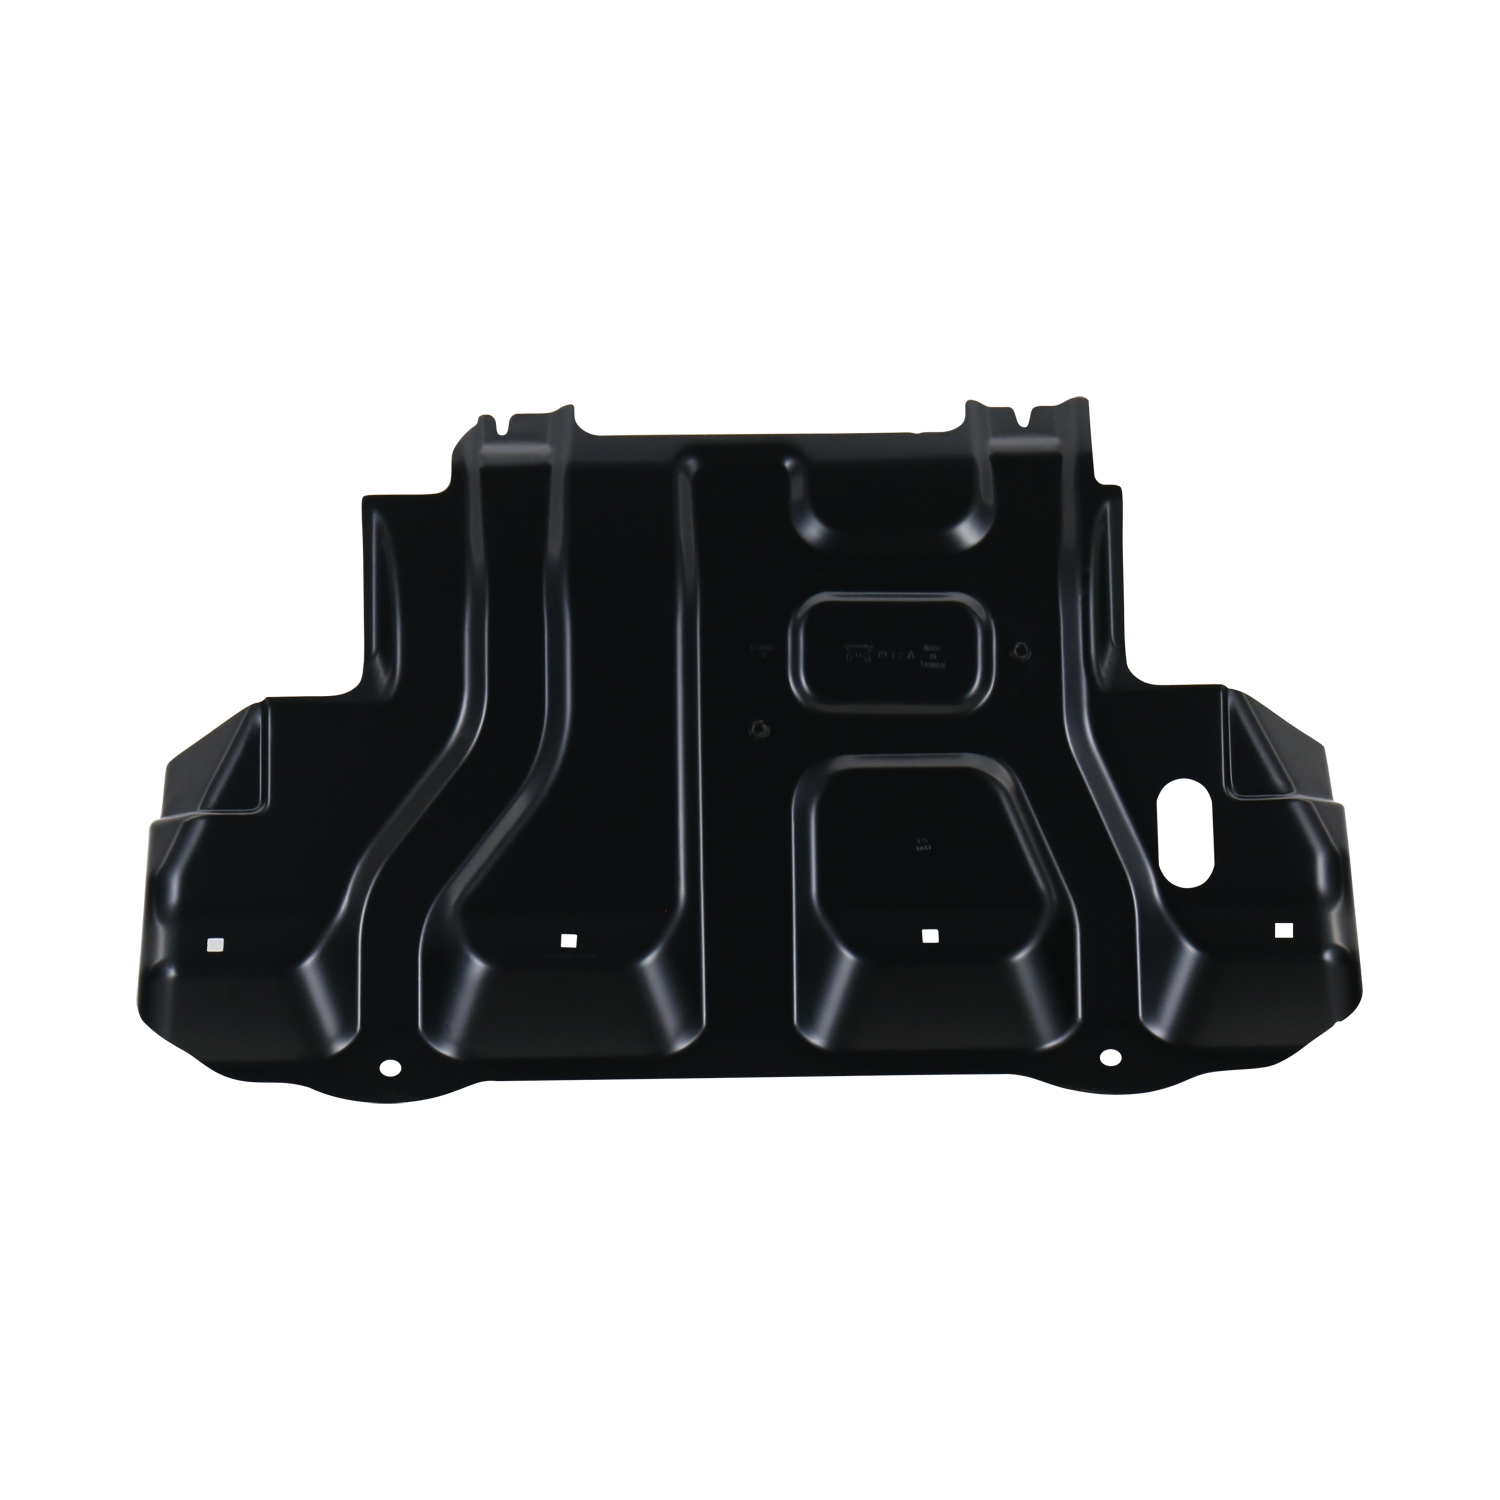 Aftermarket UNDER ENGINE COVERS for NISSAN - PATHFINDER, PATHFINDER,05-07,Lower engine cover